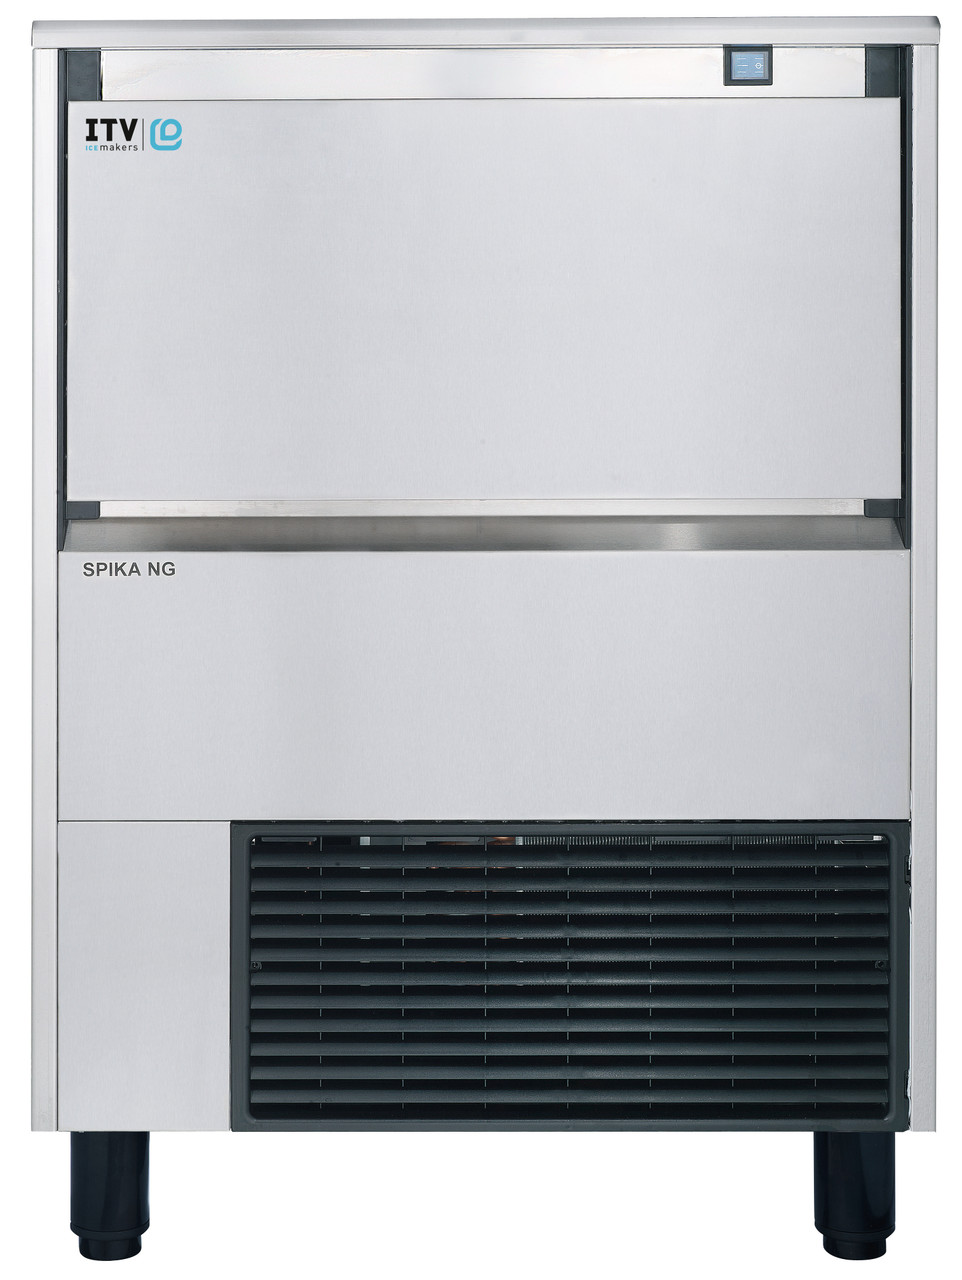 Itv Spika Ng 215 A1h Air Cooled Half Cube Under Counter Ice Maker